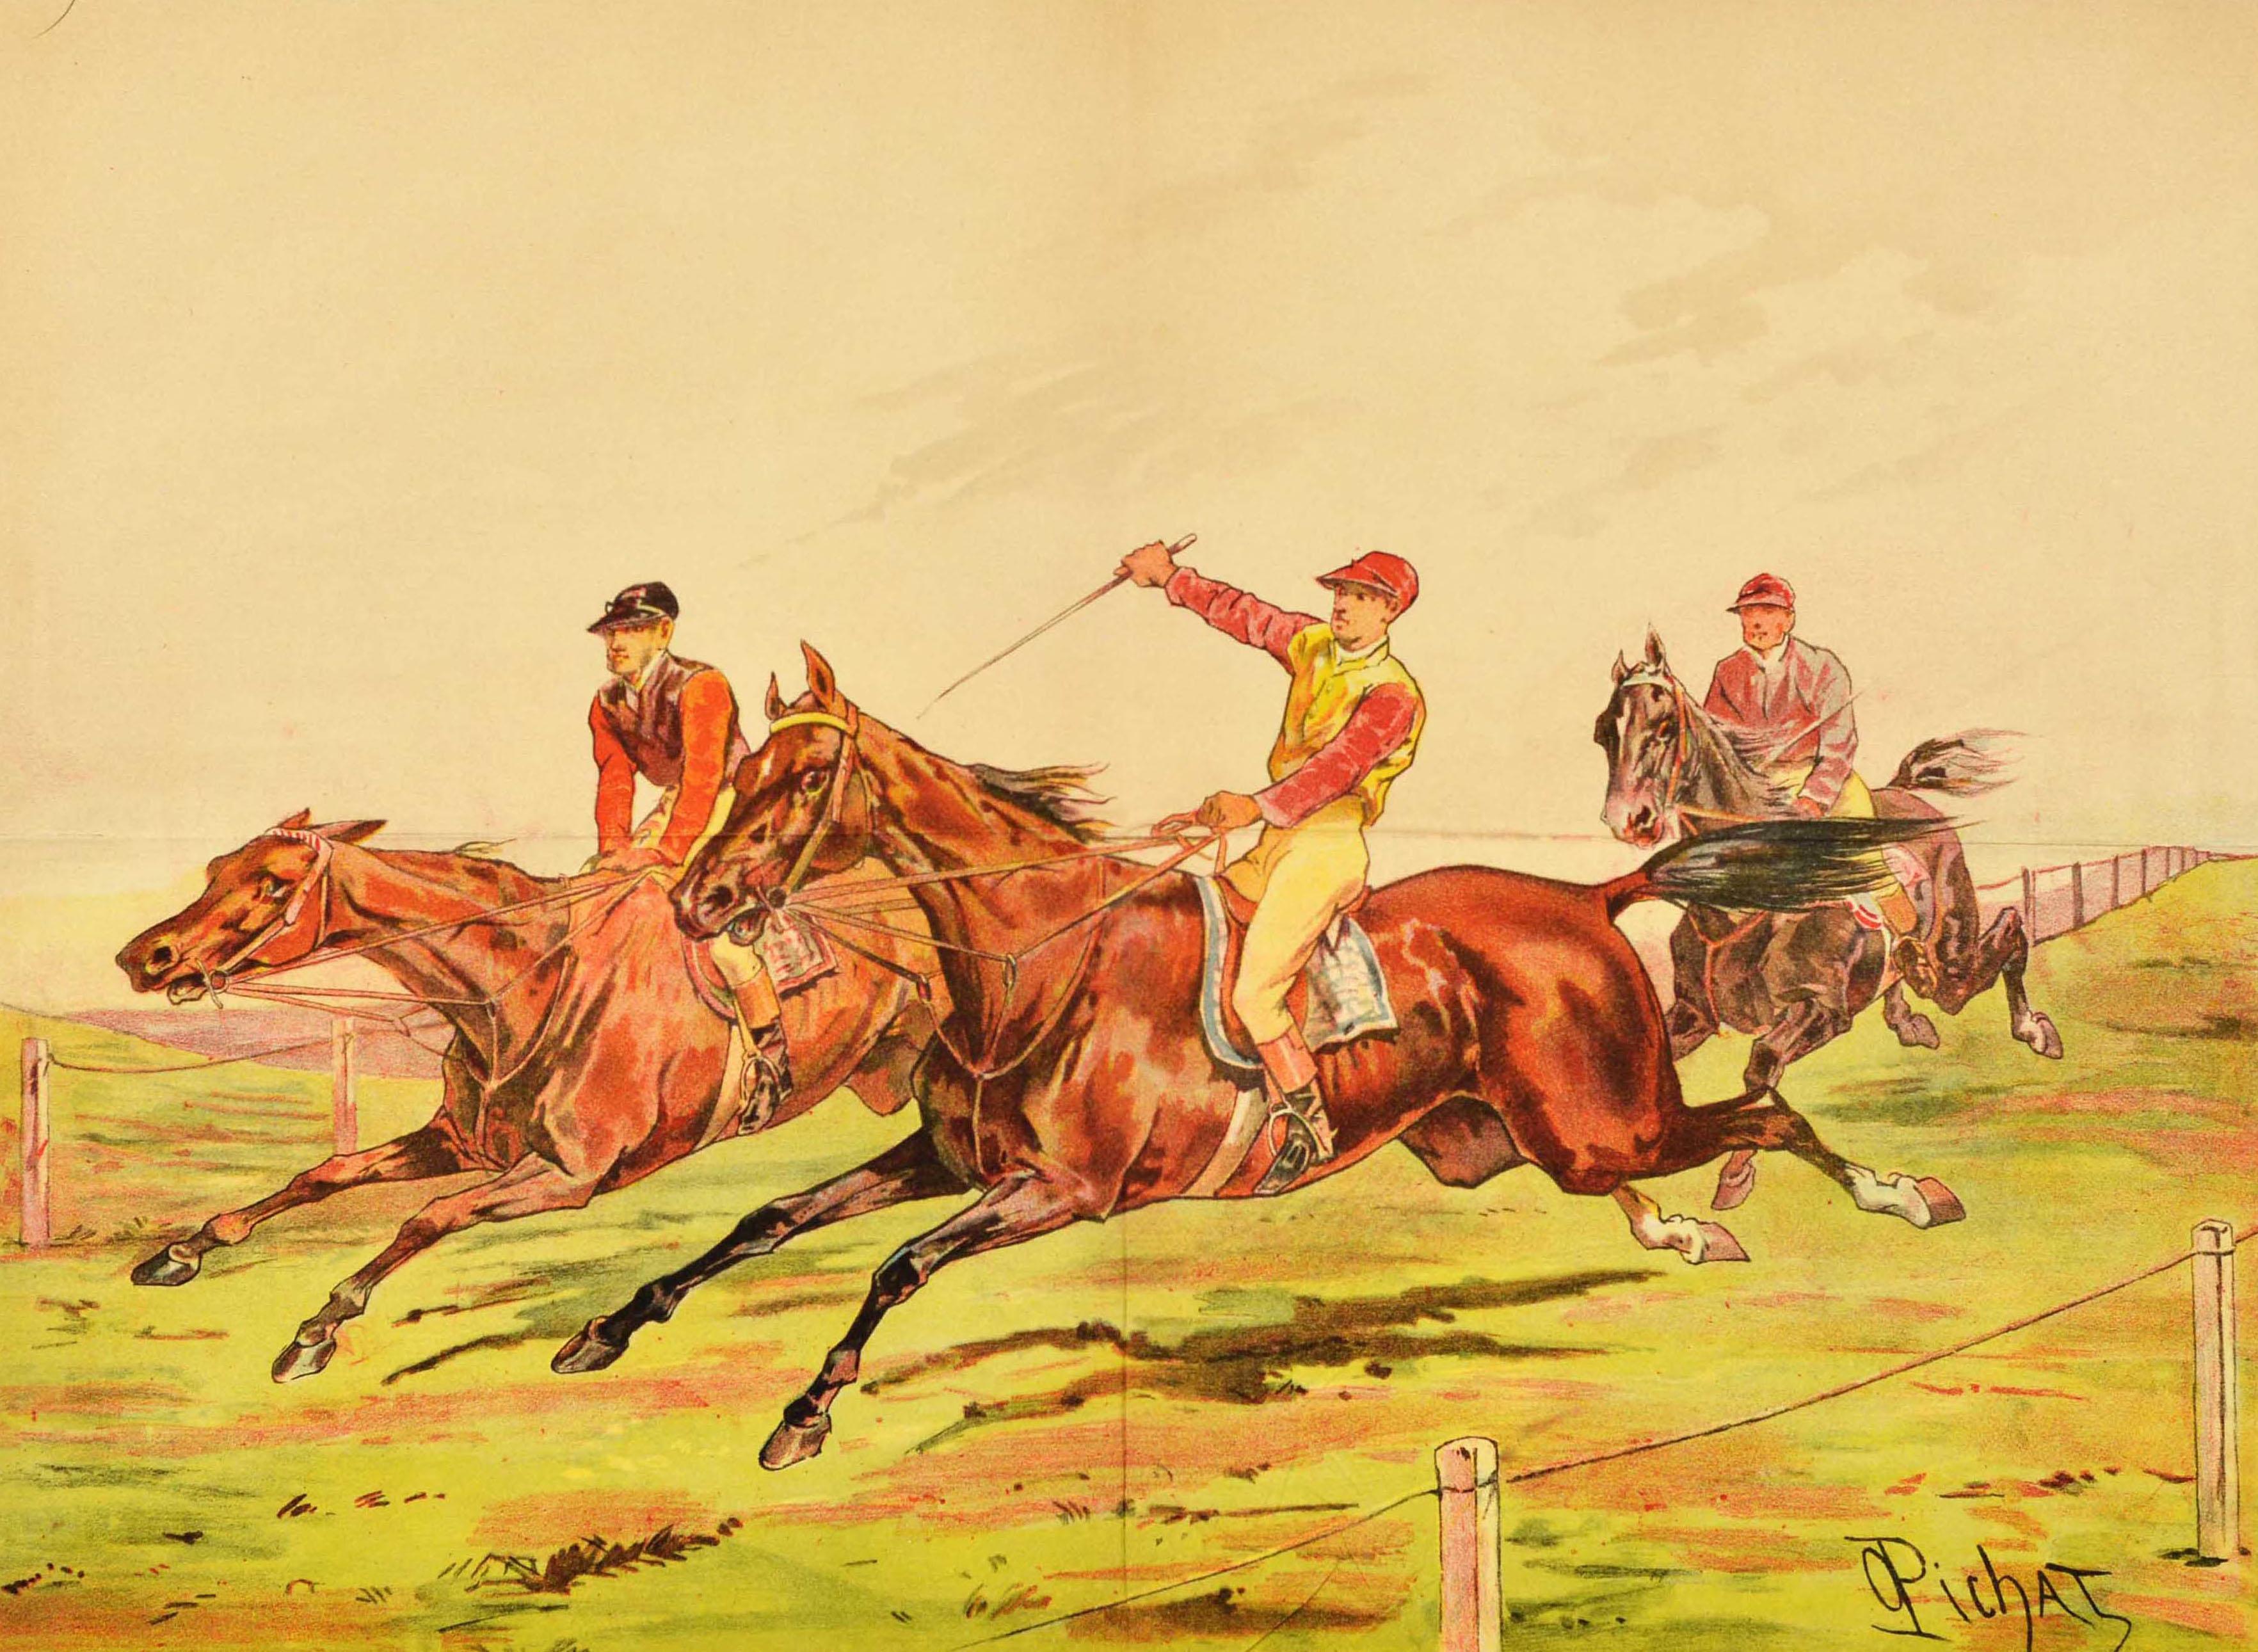 Original antique sport poster for horse racing featuring an great illustration of three jockeys riding horses on a racecourse. Artwork by the French equestrian artist Olivier Pichat (1820-1912). Printed by Camis, Paris. Horizontal. Fair condition,